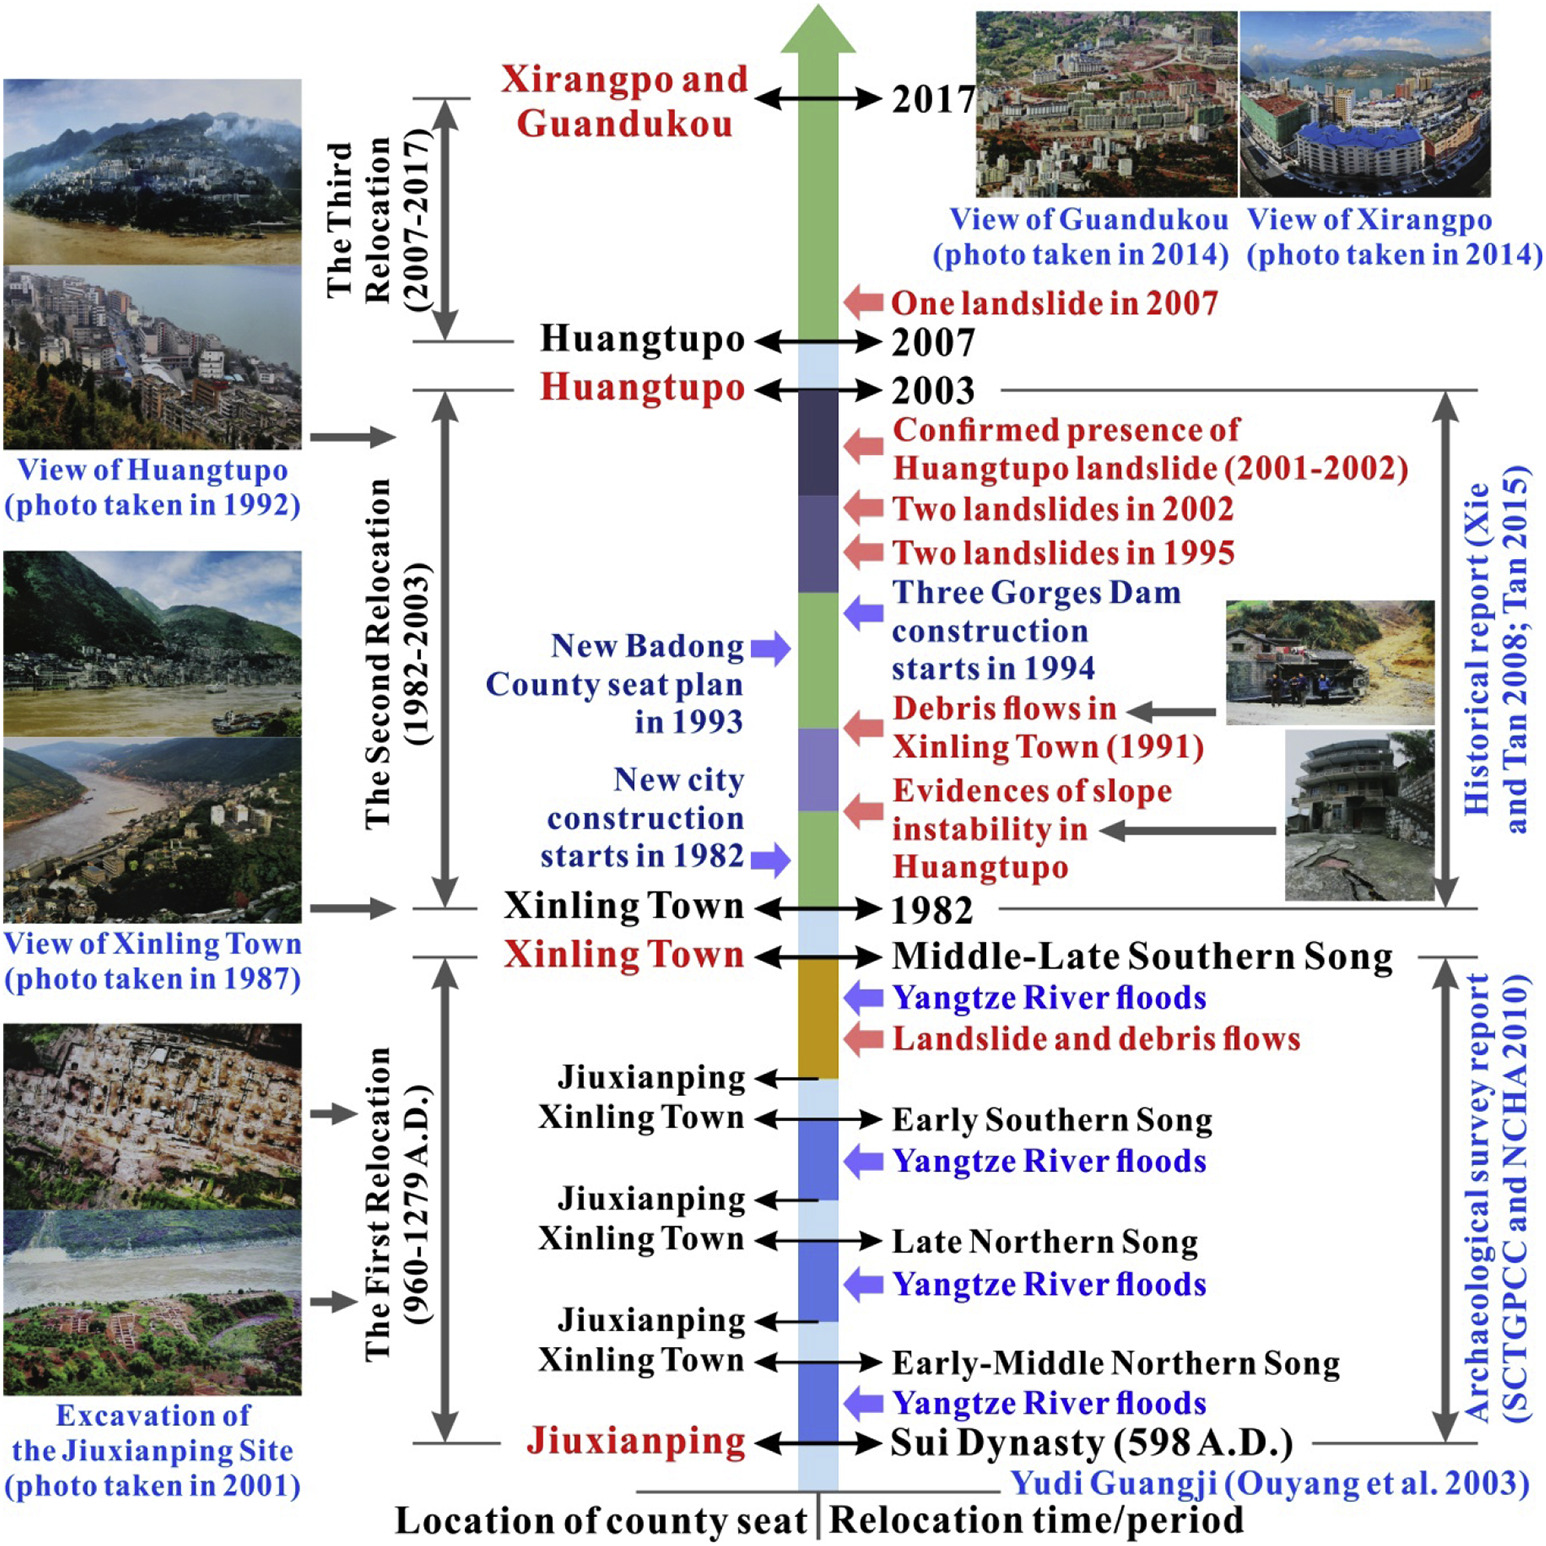 The sequence of events that led to the relocation of the county seat of Badong as a result of landslides in the Three Gorges area. Figure from Gong et al. (2021). 